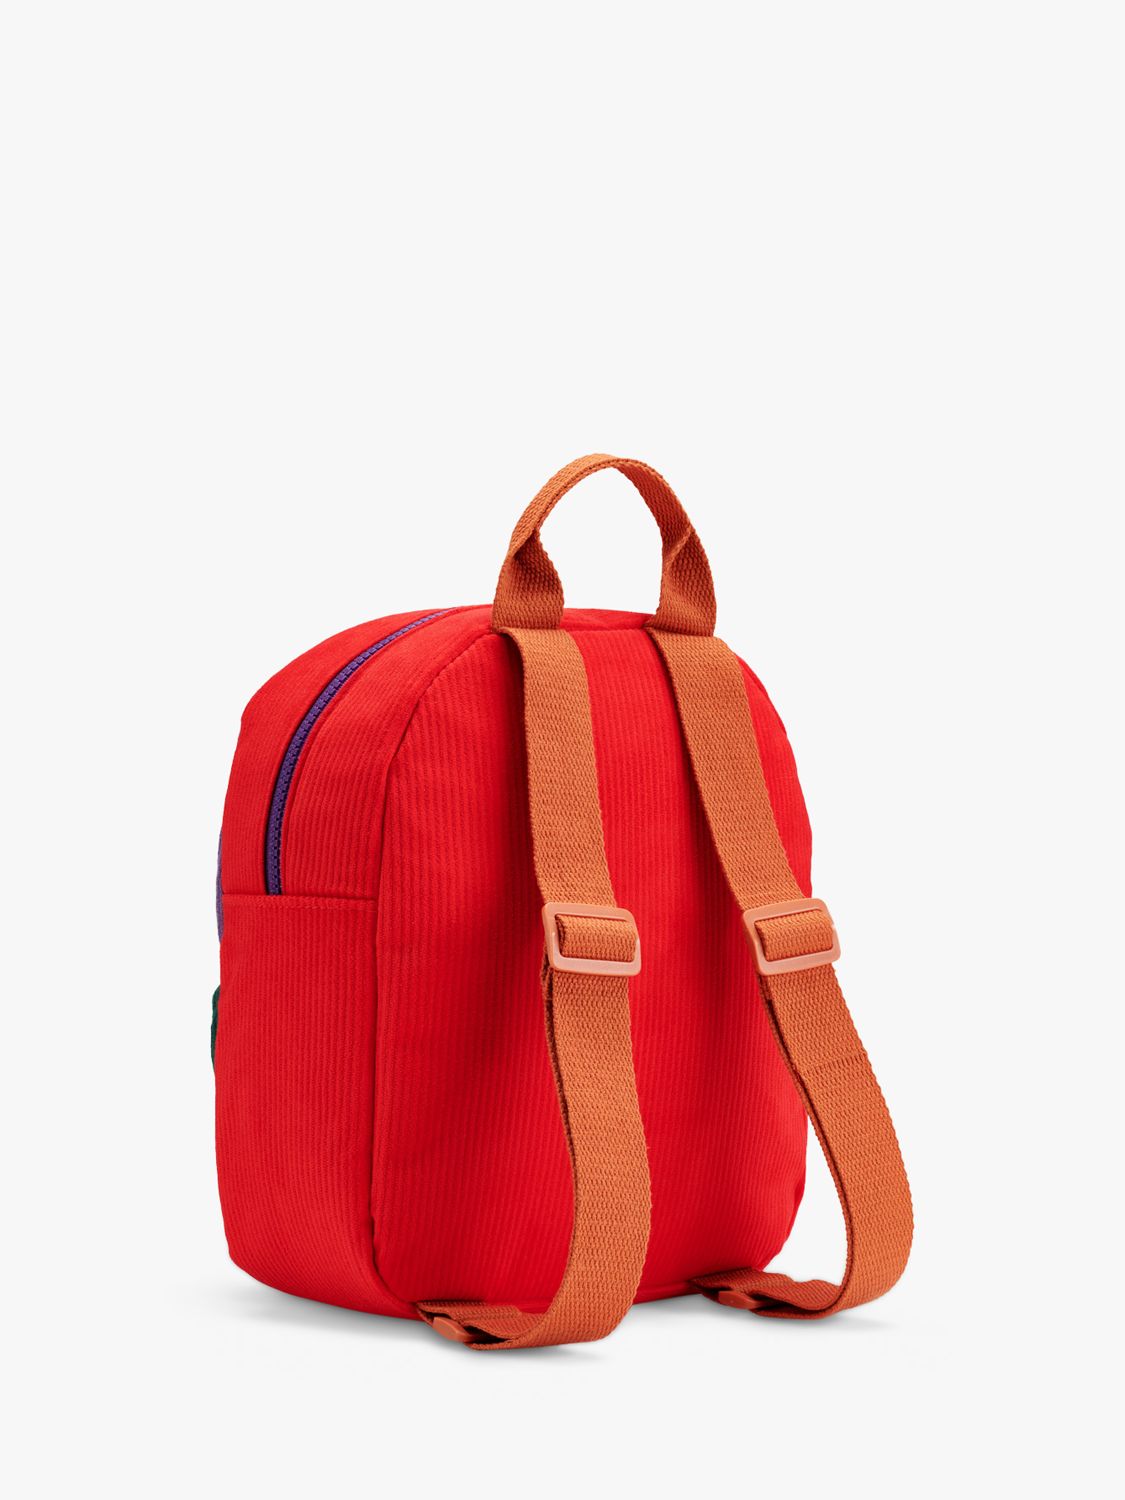 Small Stuff Kids' Initial Colour Block Backpack, Multi, I, One Size